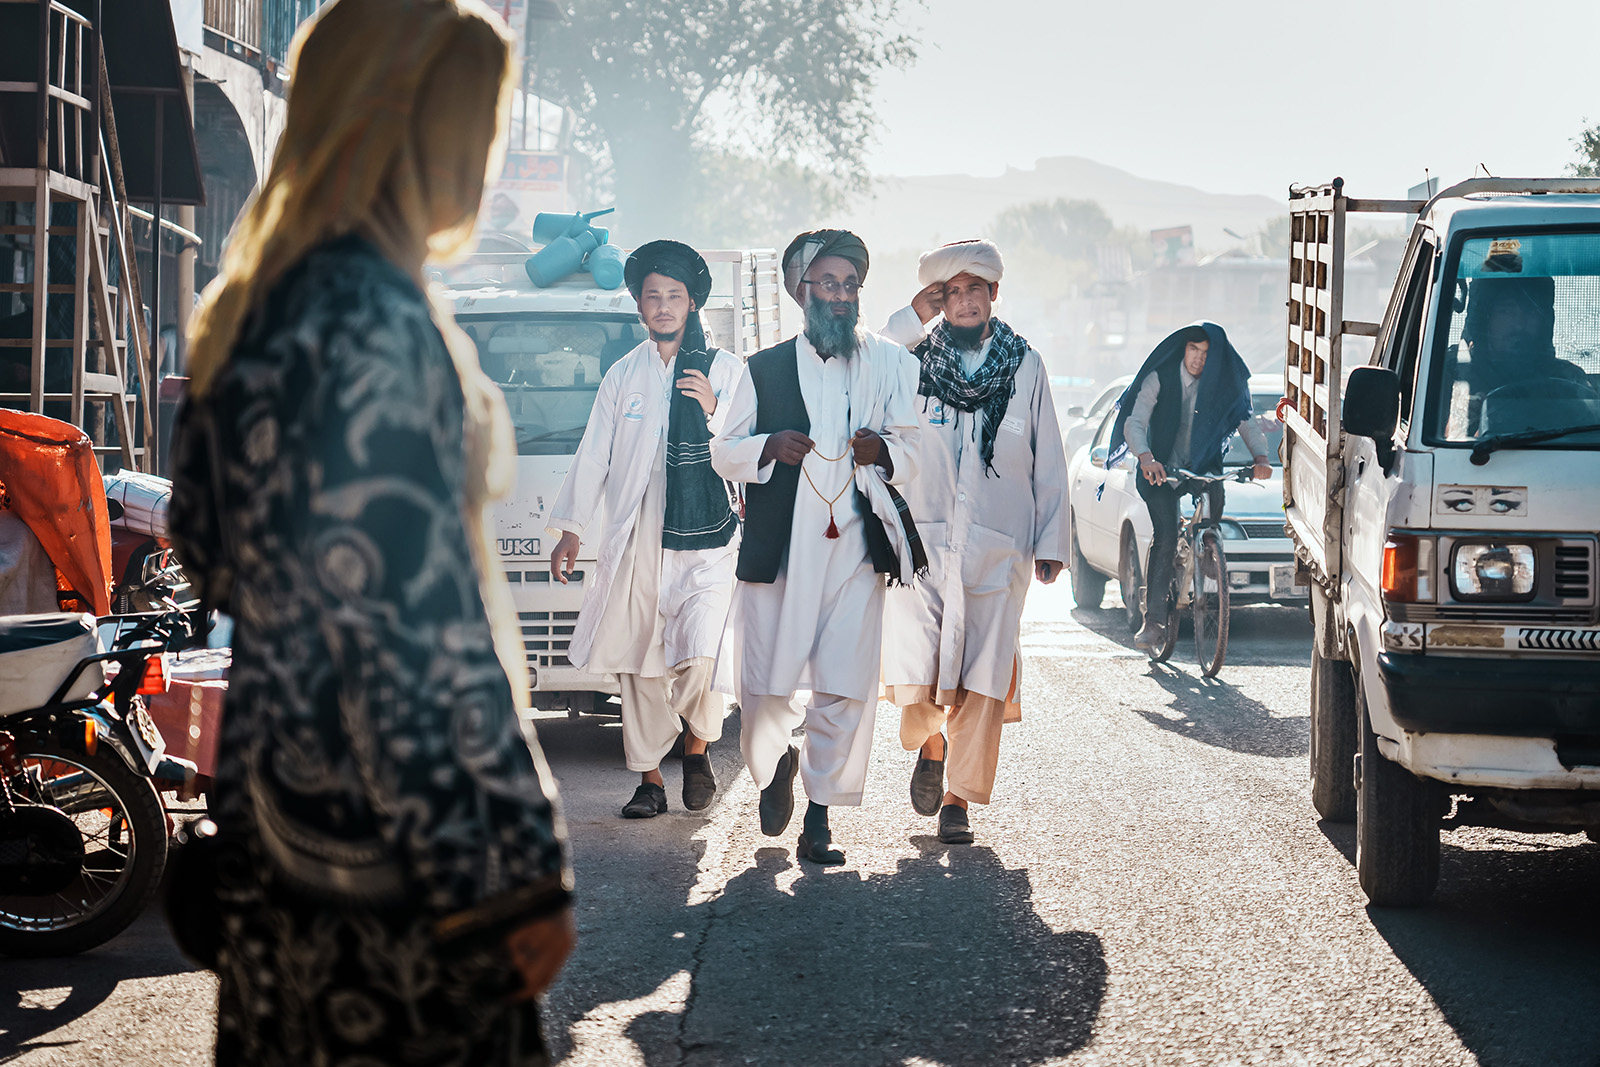 Taliban morality police patrol the streets to enforce dress codes in Bamian, Afghanistan. Photo: TNS